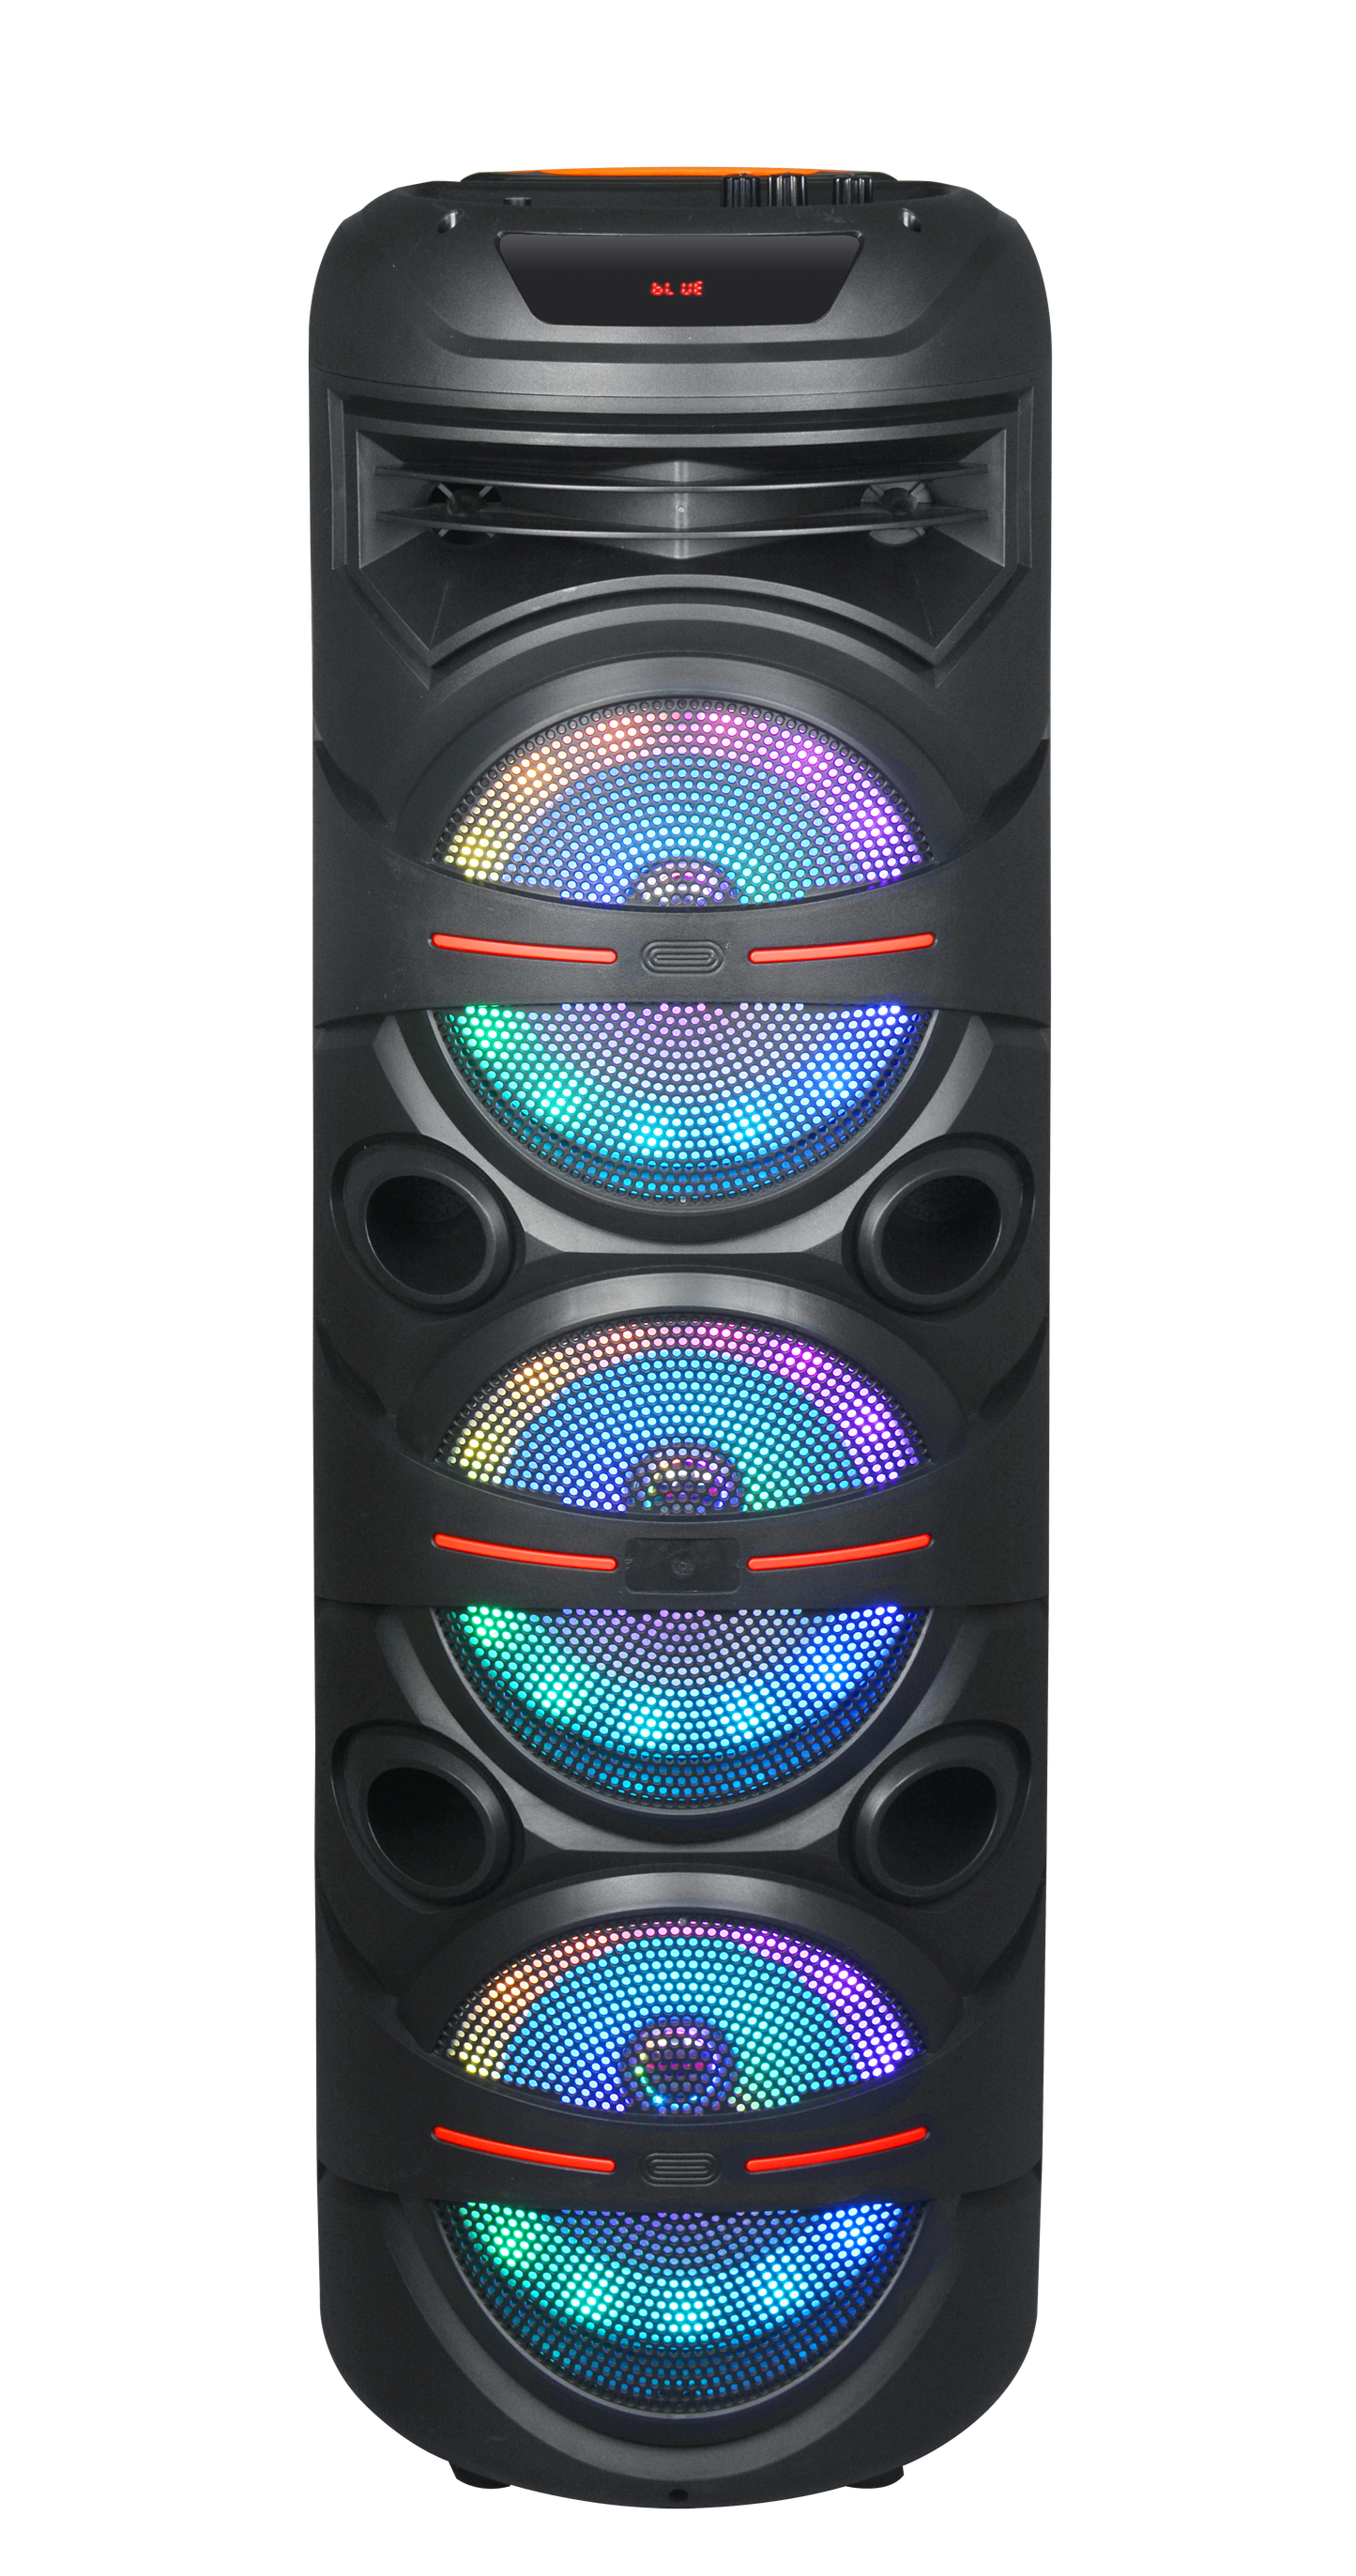 TOPTECH MAX-8 3 * 10''Woofer with Extra Bass Rechargeable Party Portable Bluetooth Speaker with Multi-Disco Lights on Grill,10 Meters (33ft) Bluetooth Distance,of Blazing Powerful Sound,for Home/Outdoor,Gift